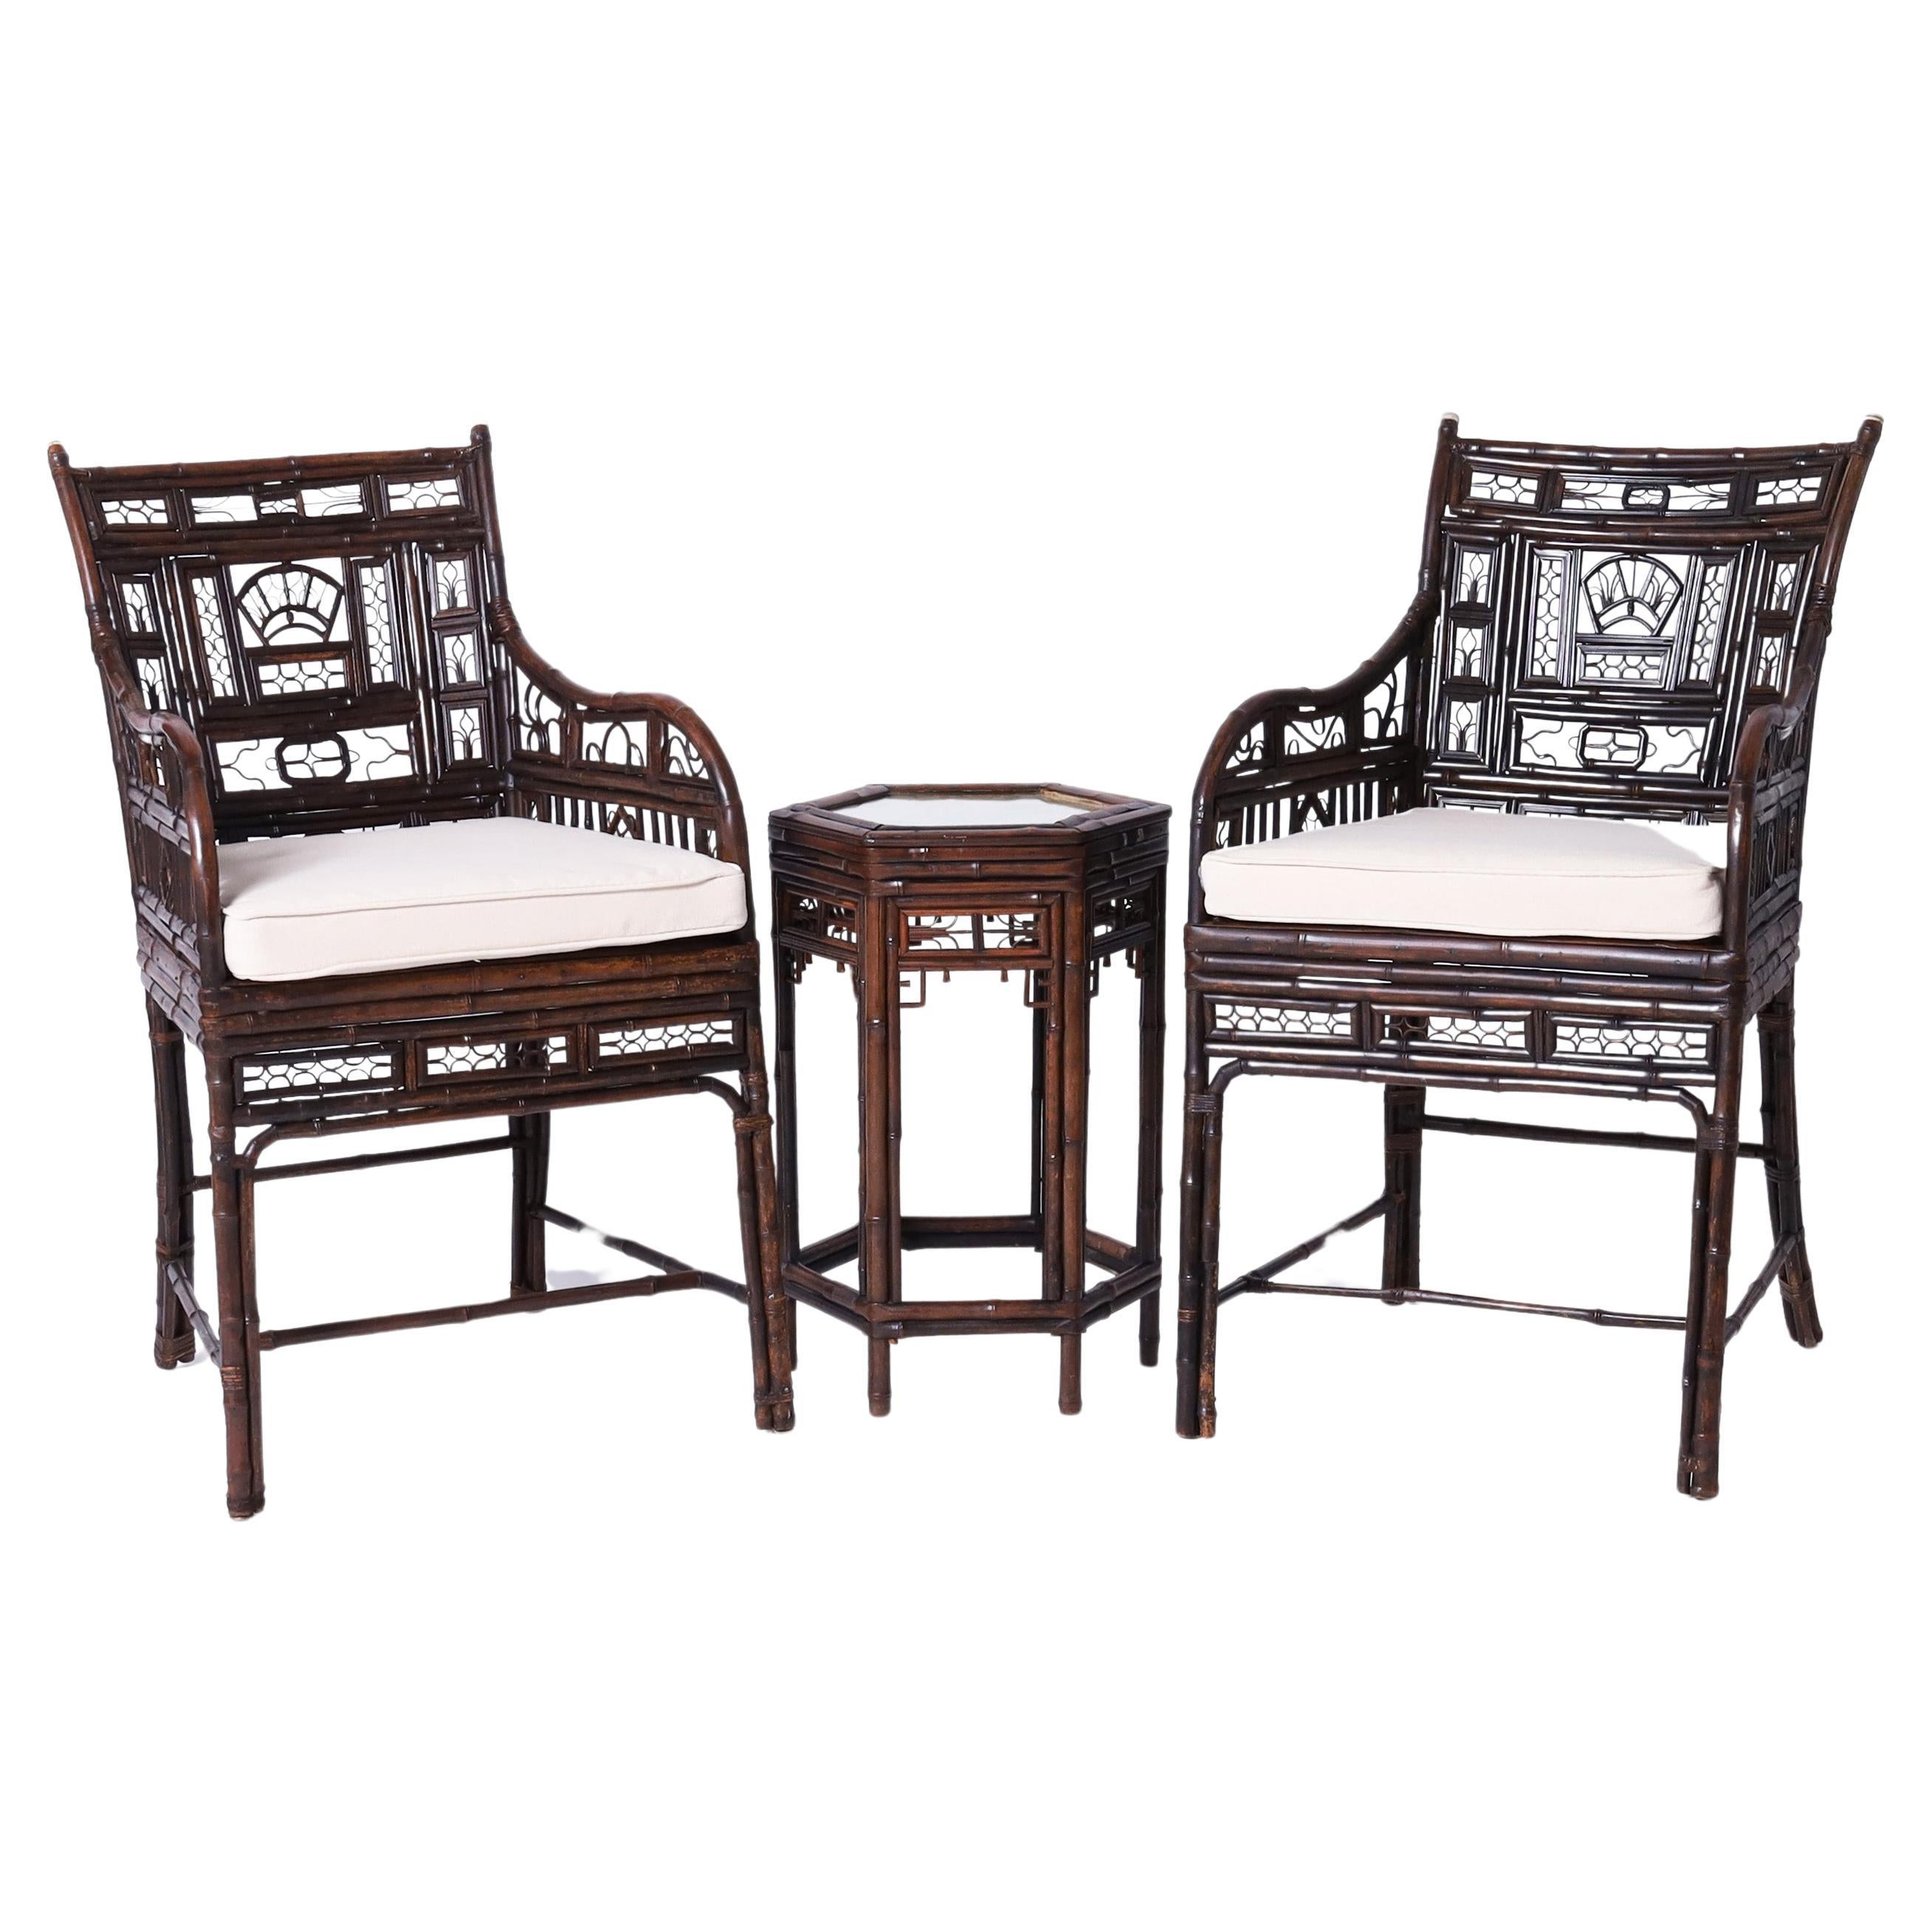 Chinese Export Bamboo and Rattan Pair of Chairs and Stand For Sale